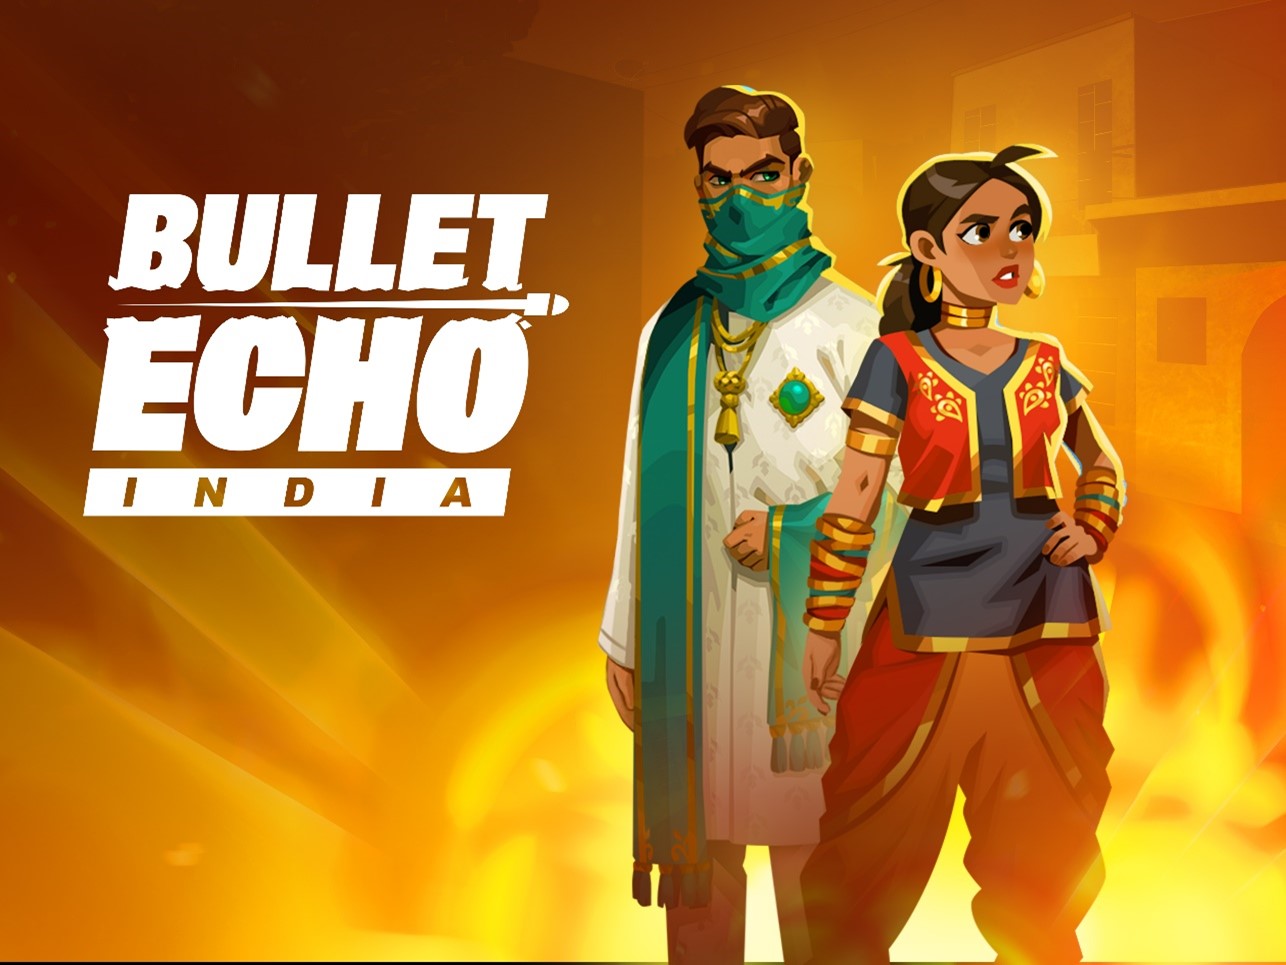 Bullet Echo India, a game-changer launched by KRAFTON and ZeptoLab scales to new height at The Google Playstore